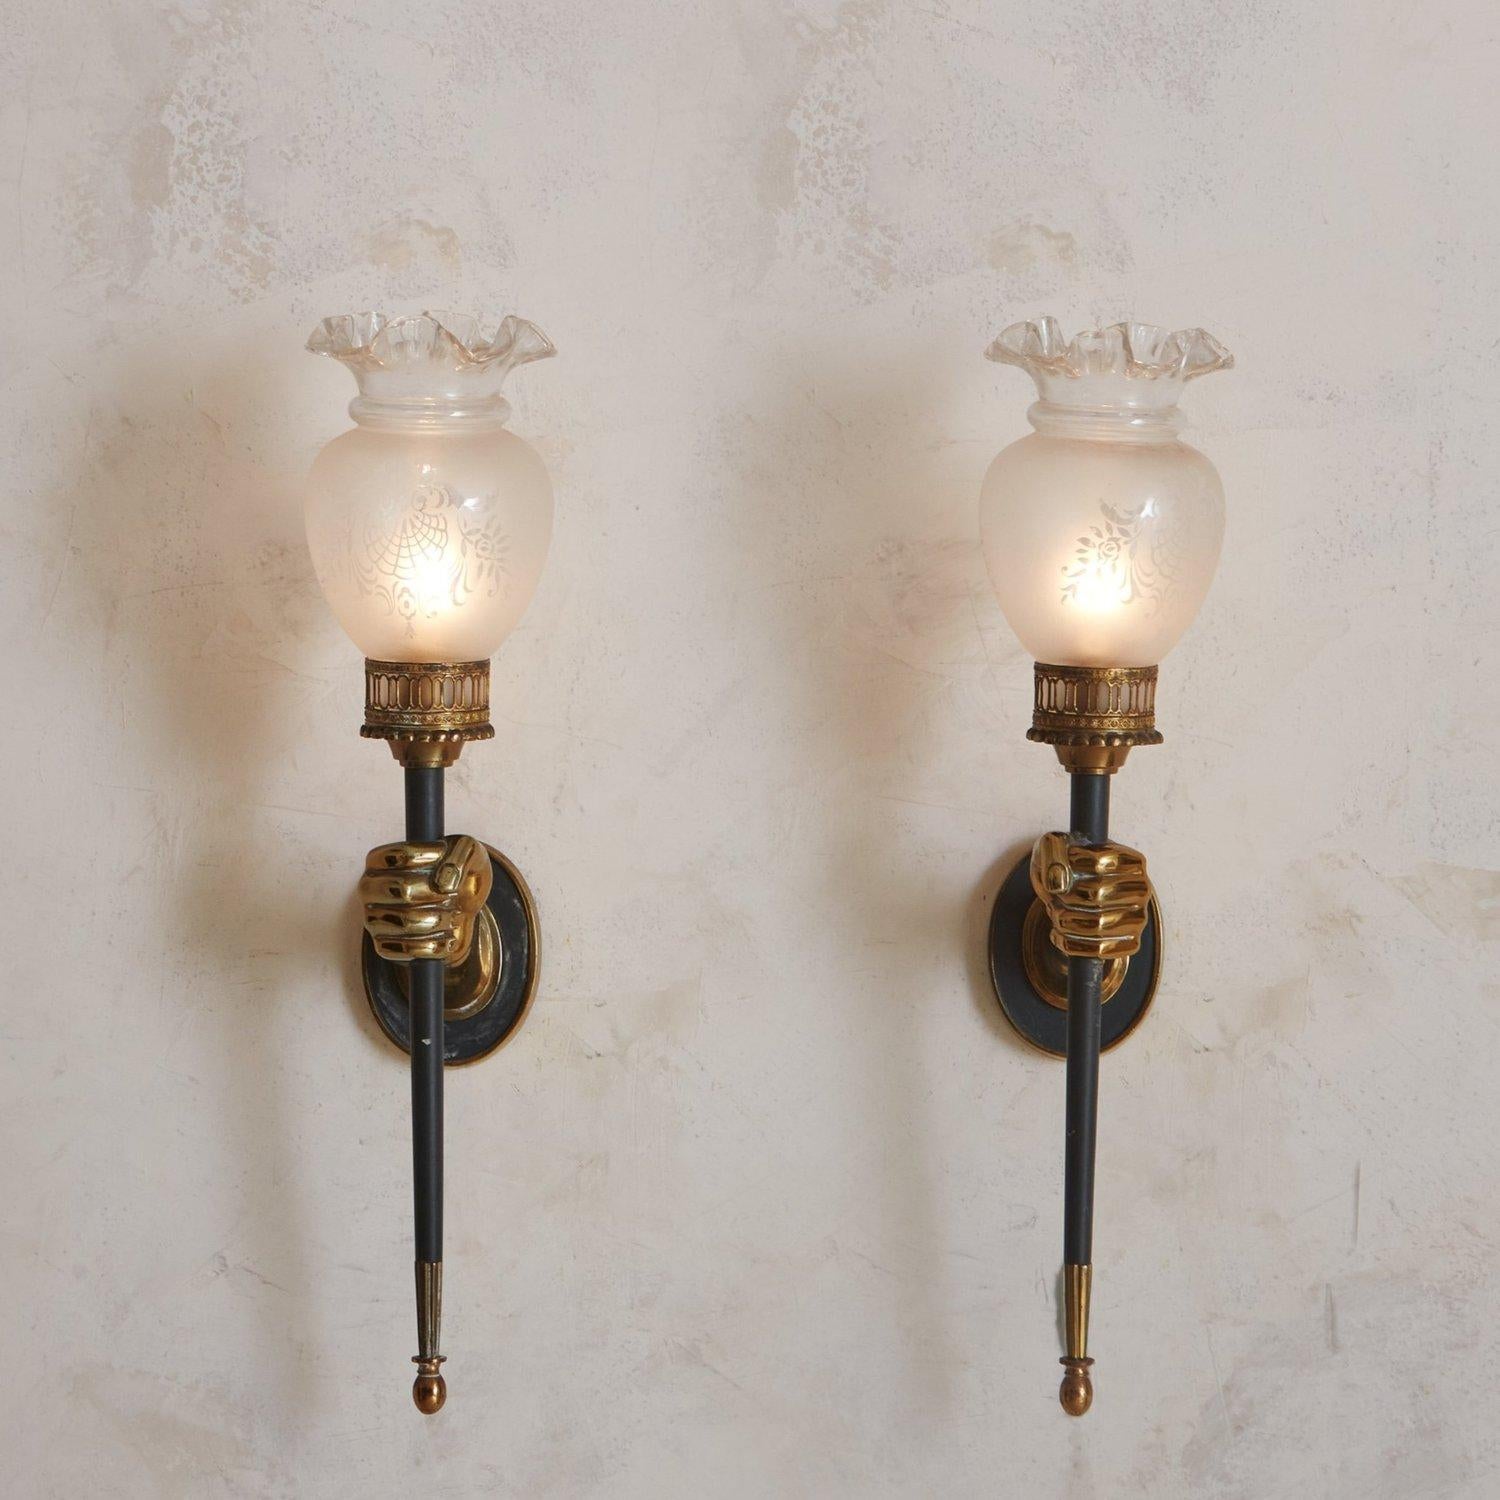 A pair of 1960s sconces by Parisian firm, Maison Arlus. This pair features bronze hand motifs which hold elegantly angled black lacquered torch arms. They have circular wall plates and retain their original frosted glass shades with etched floral